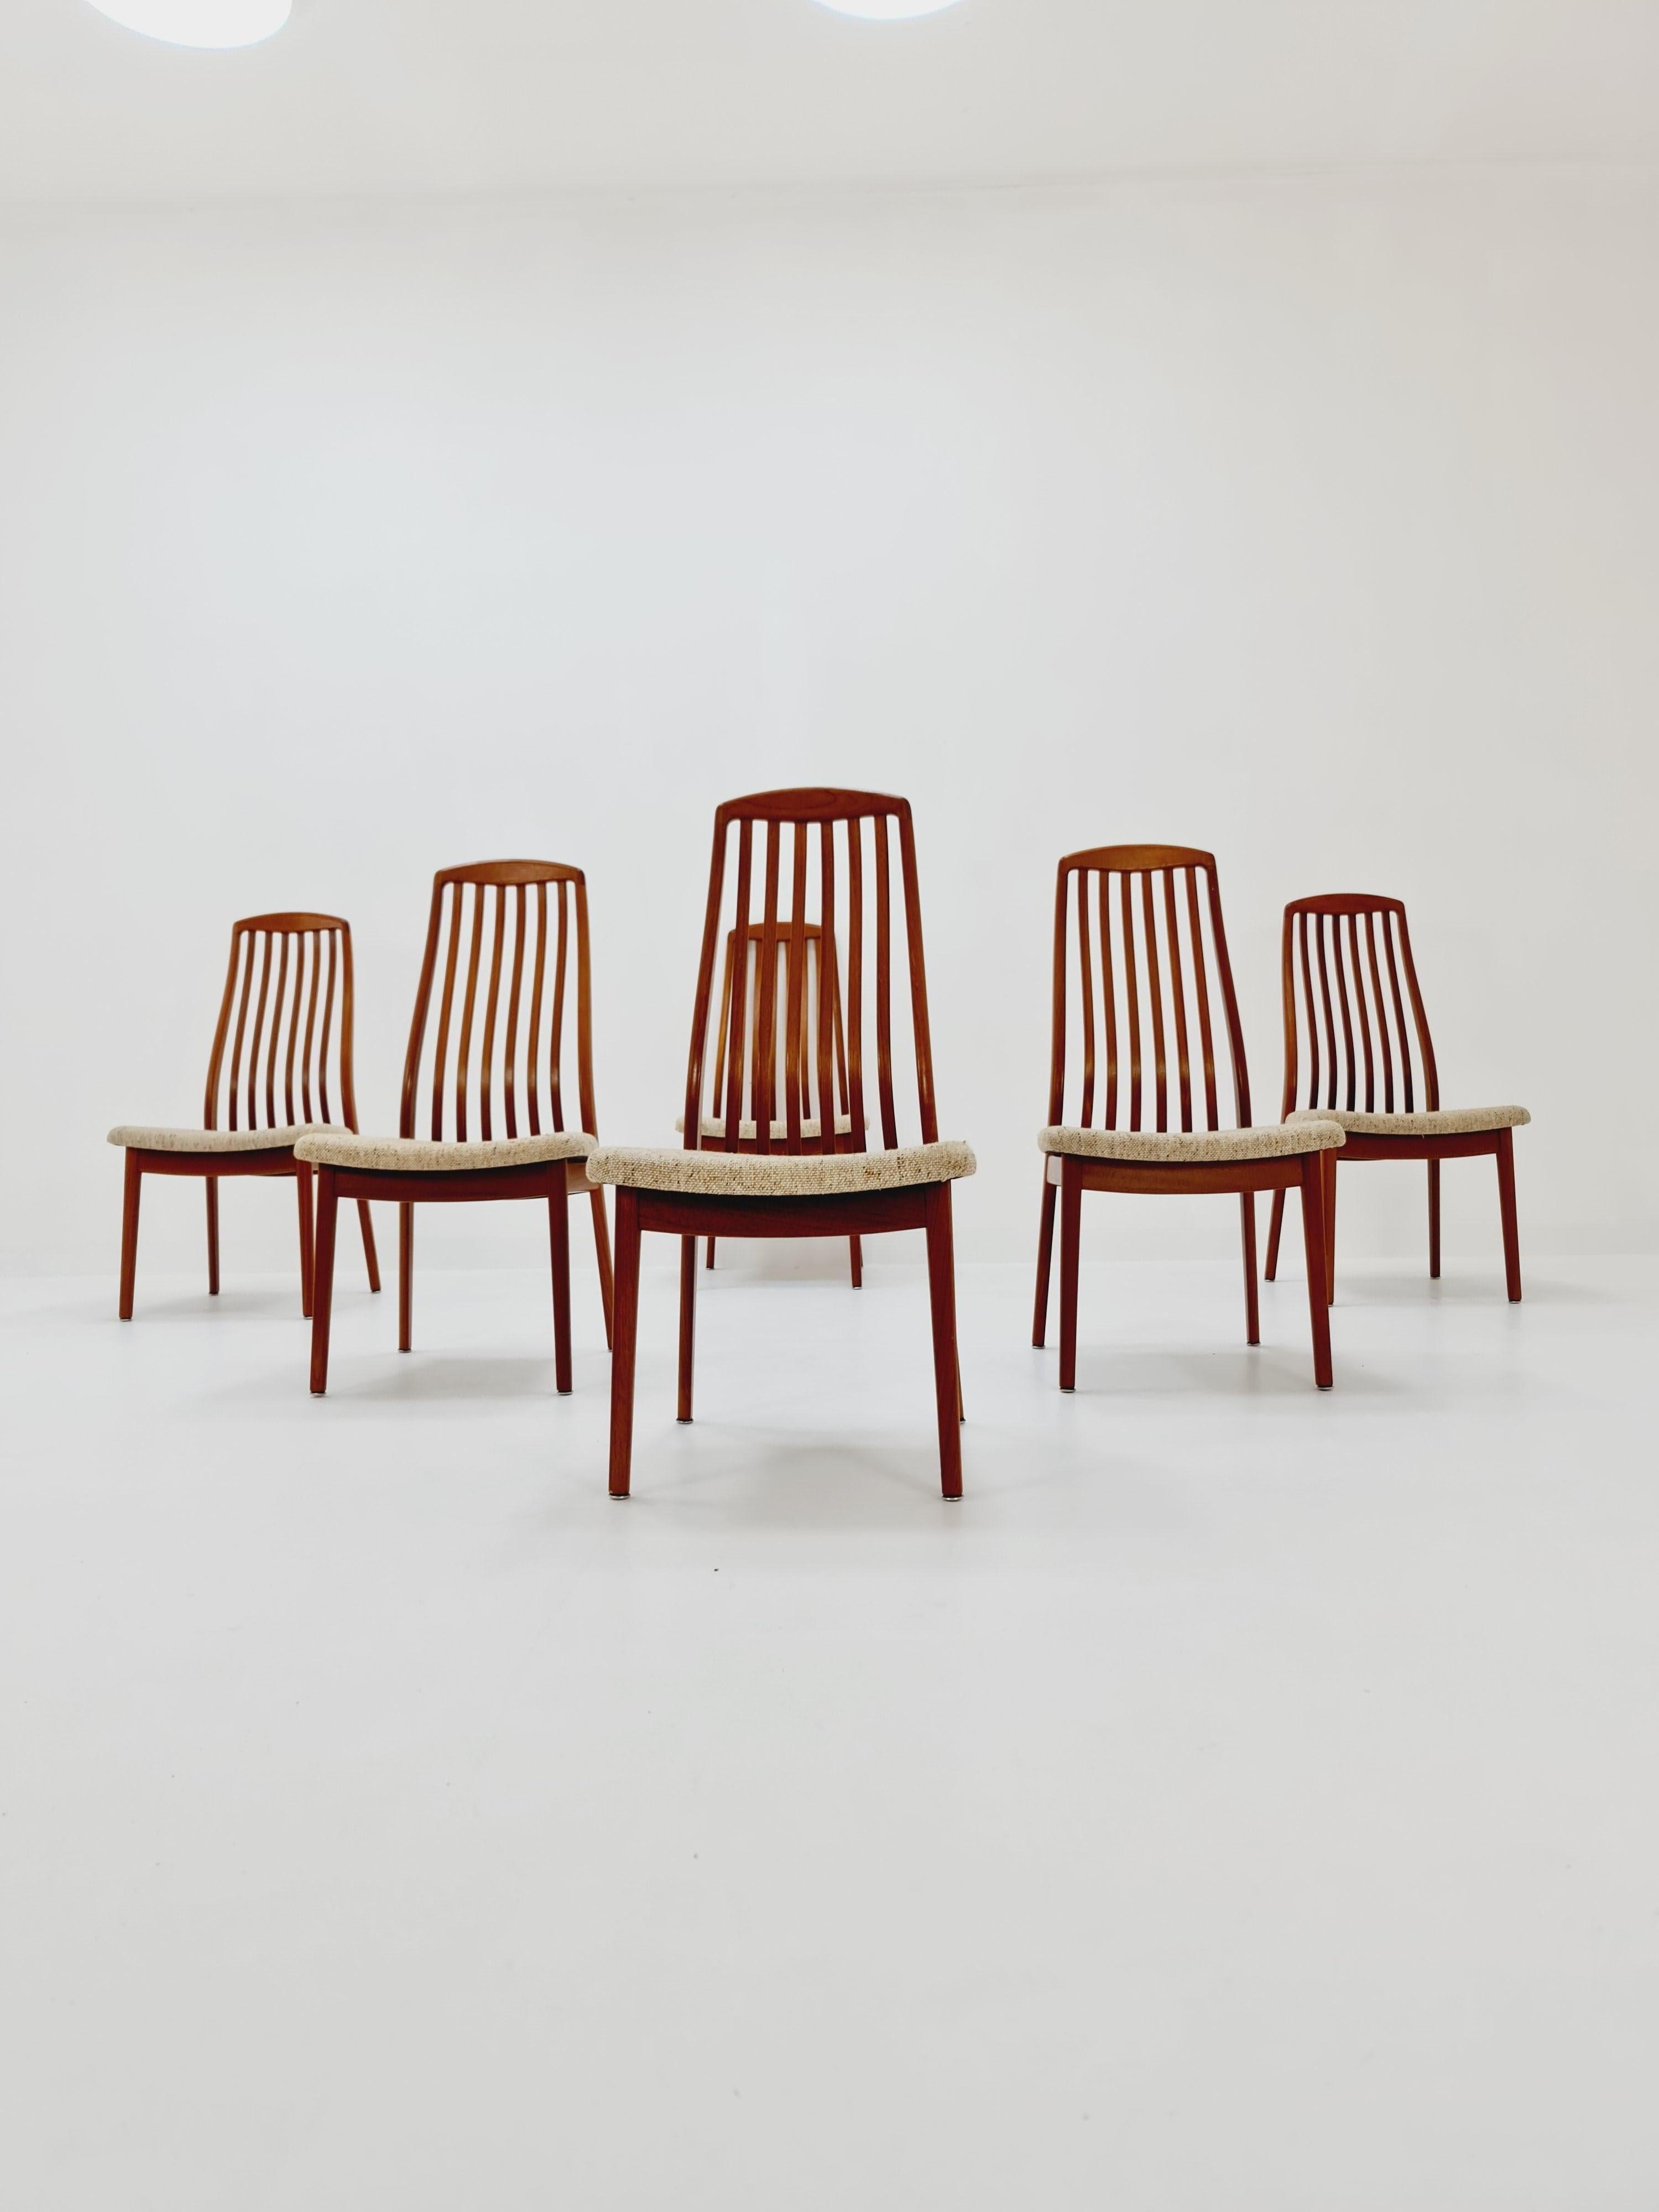 Danish teak dining chairs by Schou Andersen 1960s, set of 6


The chair frames are made from solid teak and and are in great condition.

Made in Denmark in the 60s

Dimensions:
Width: 50  cm
Depth: 47  cm
Height: 100 cm
Seat Height: 43 cm

Please